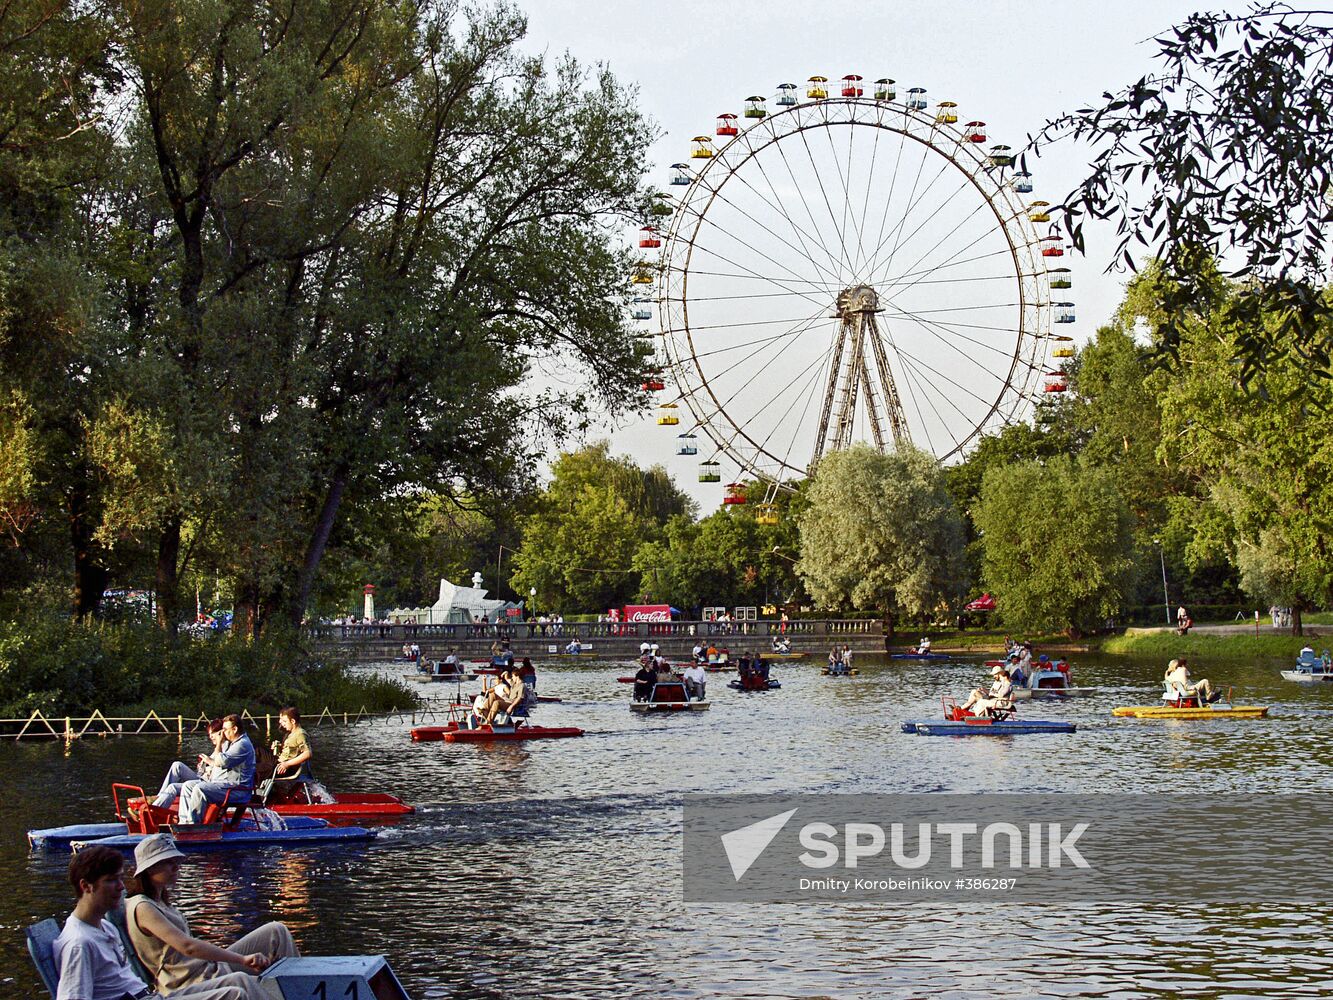 The Gorky Culture and Recreation Park